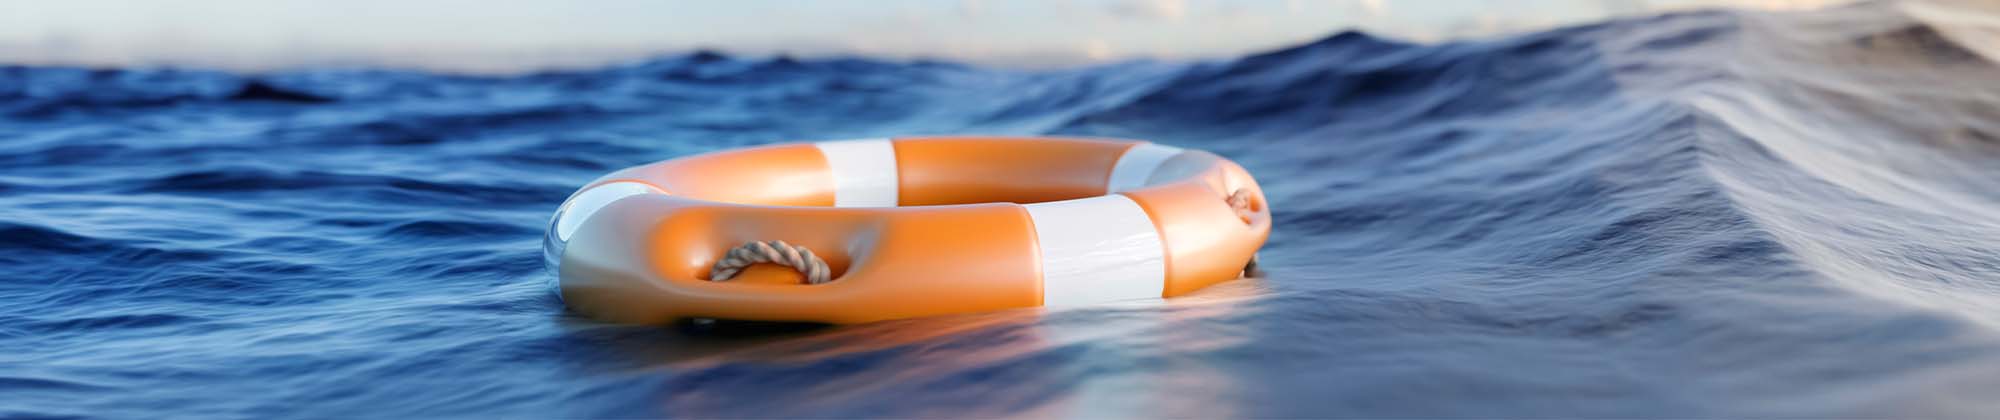 orange and white life raft floating in open water